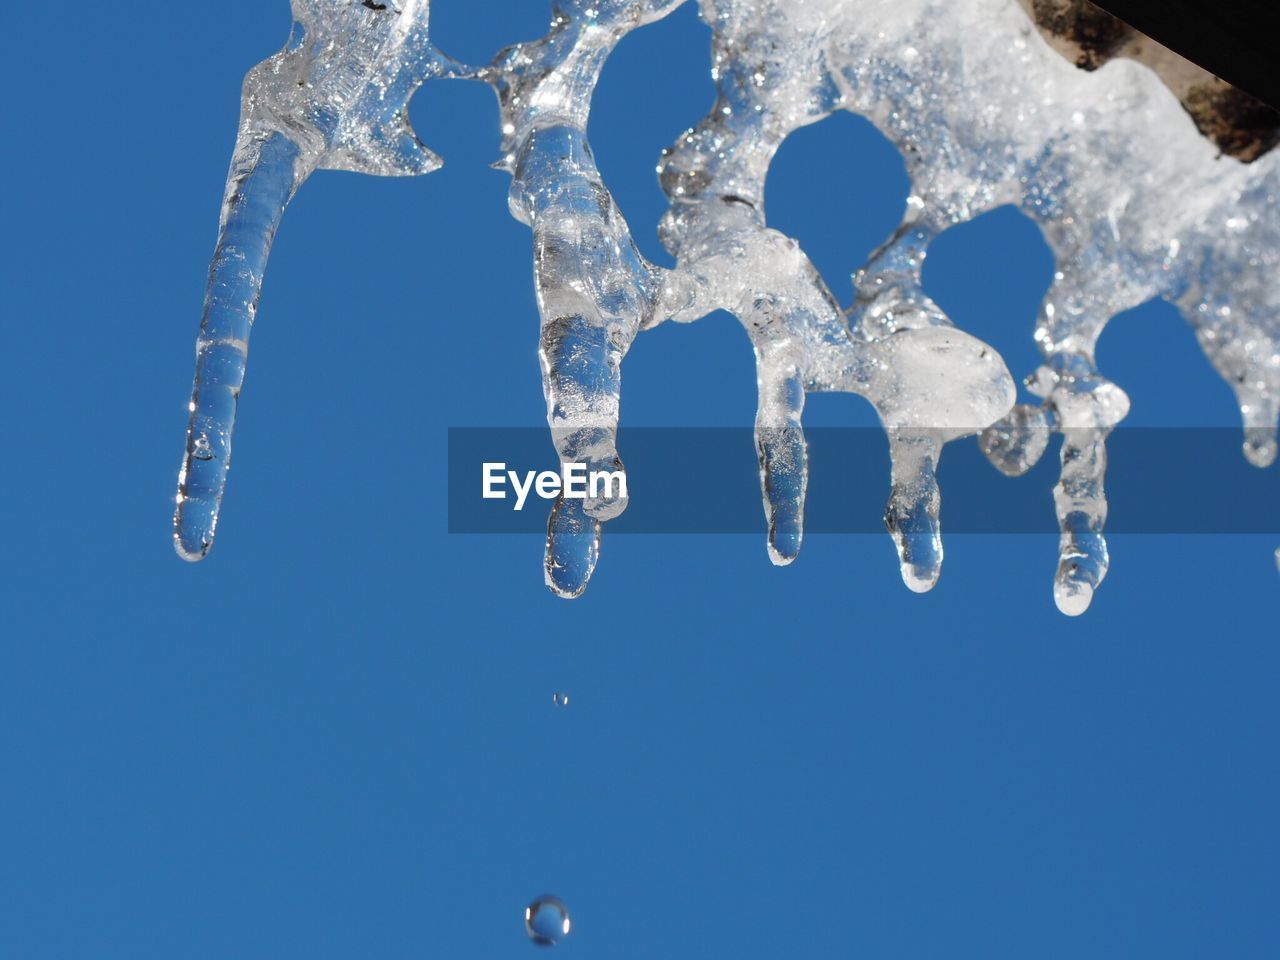 CLOSE-UP OF ICE CRYSTALS AGAINST BLUE SKY